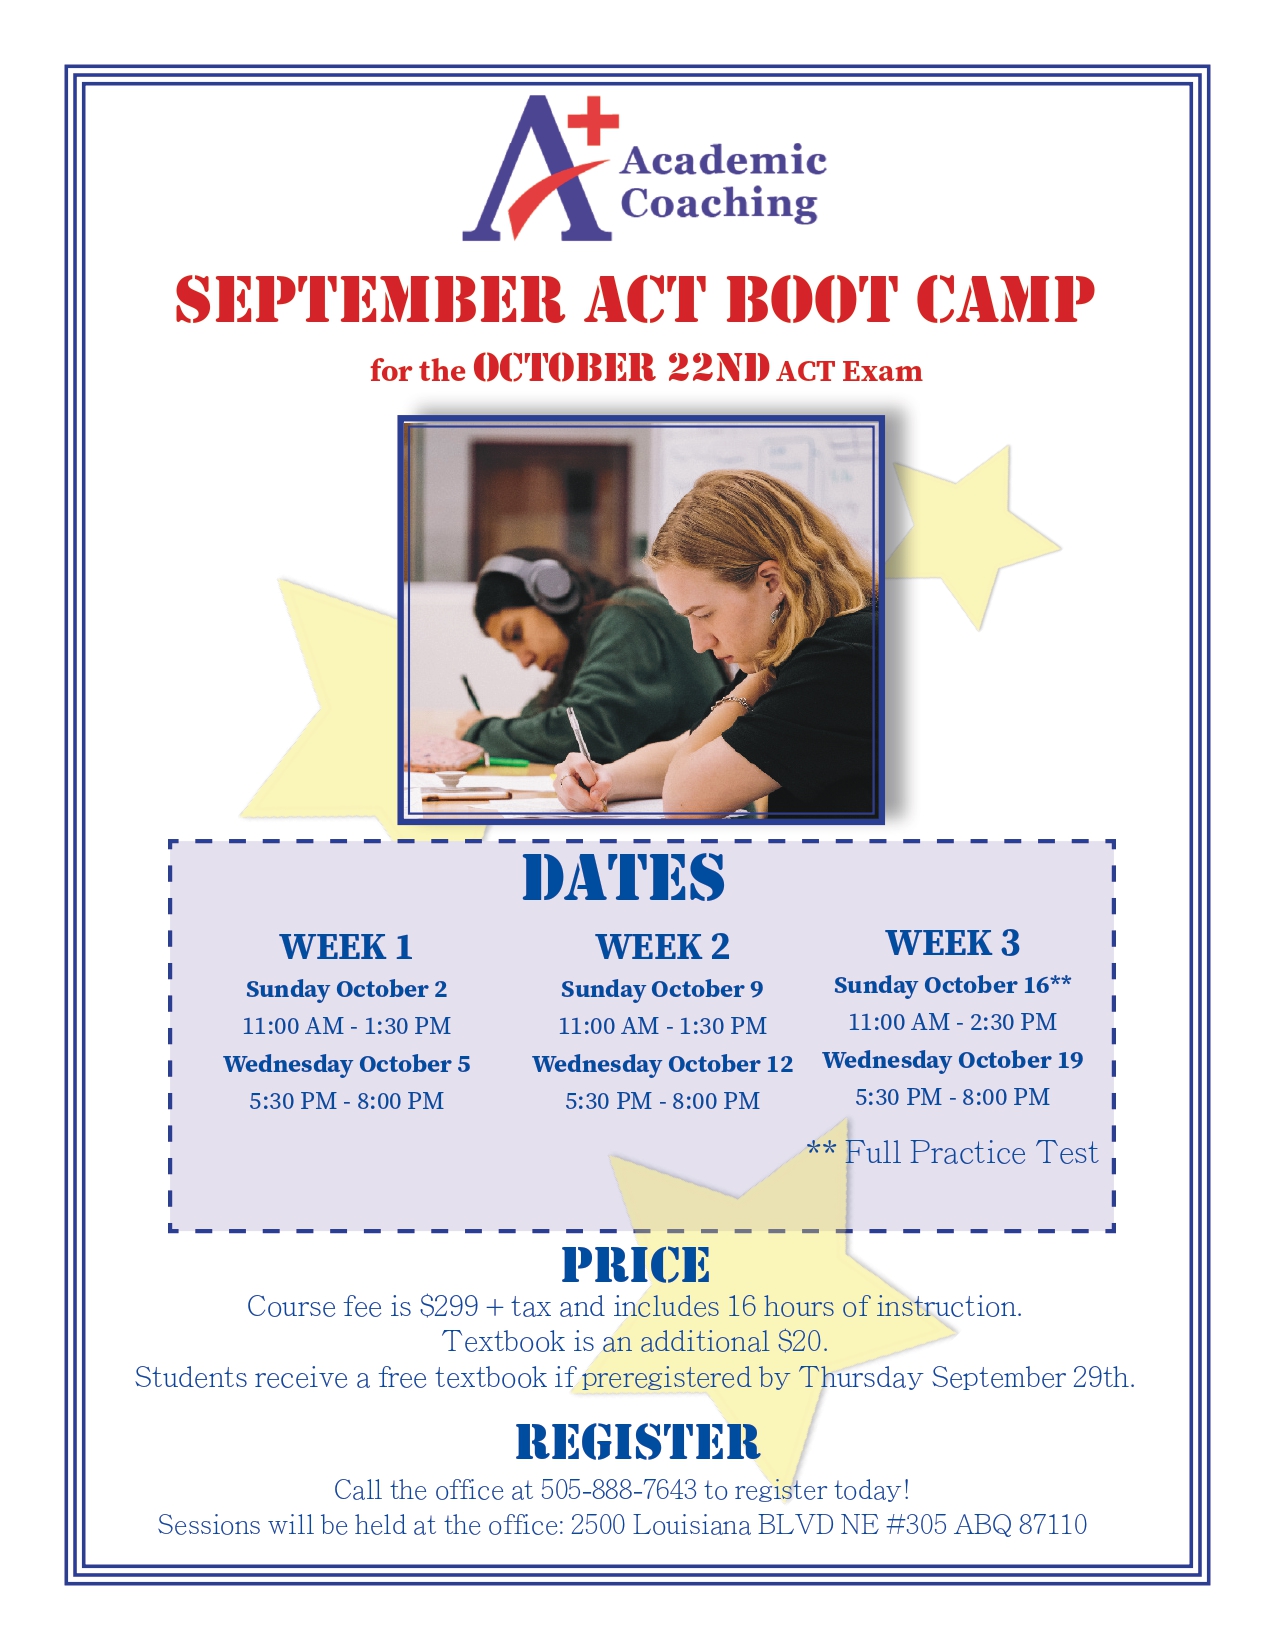 Boot Camps A+ Academic Coaching